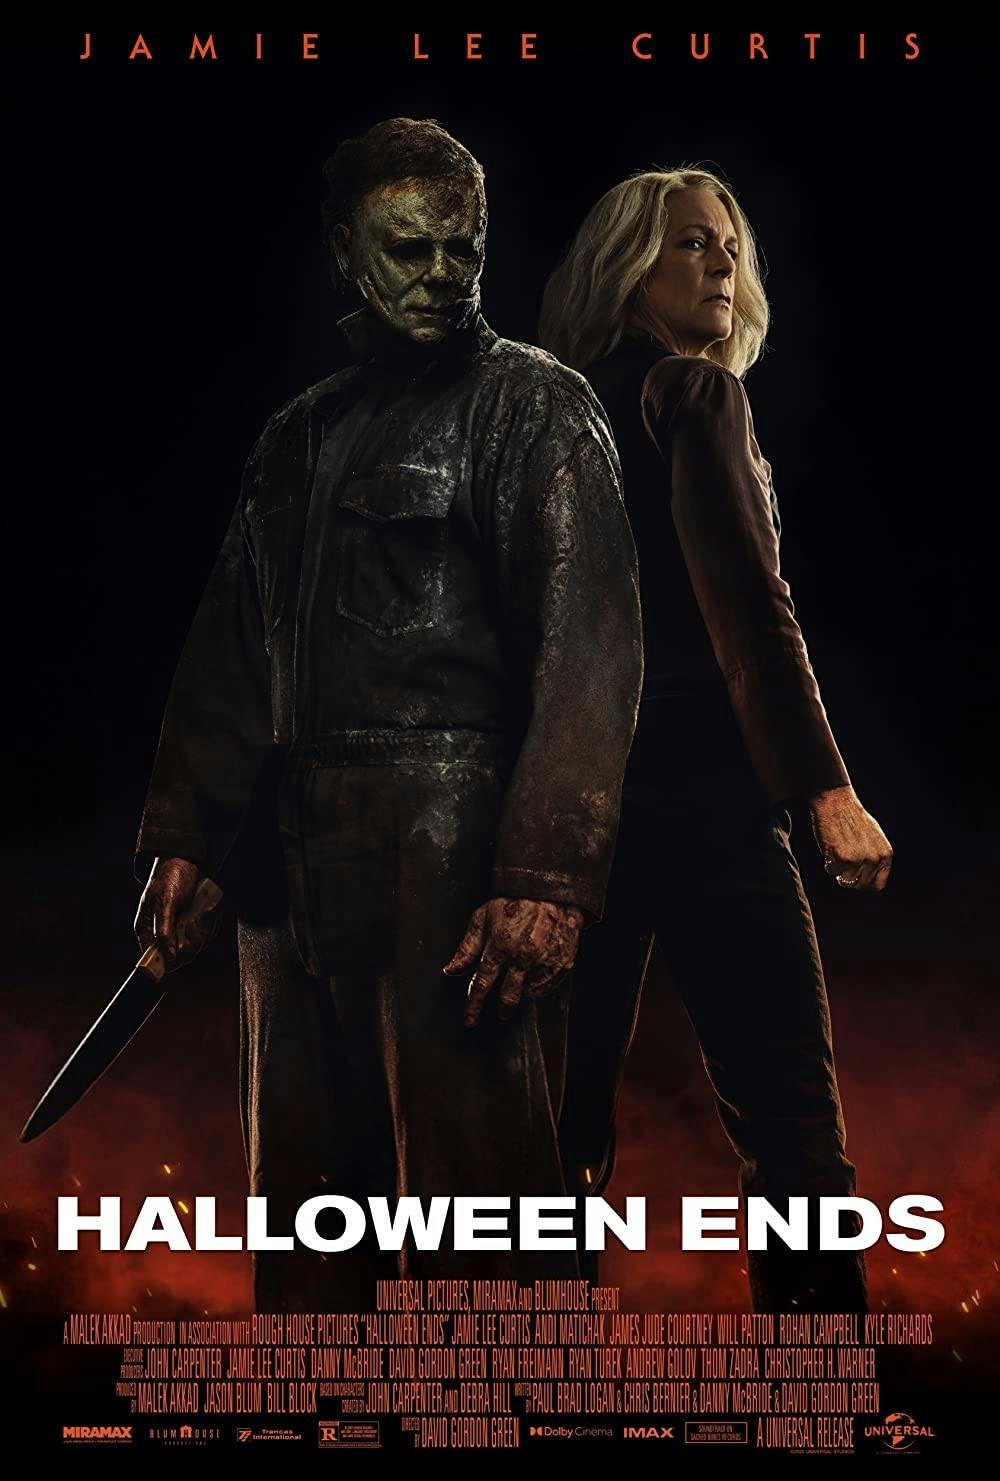 Review: 'Halloween Ends' brings a horrendous ending to an incredible franchise